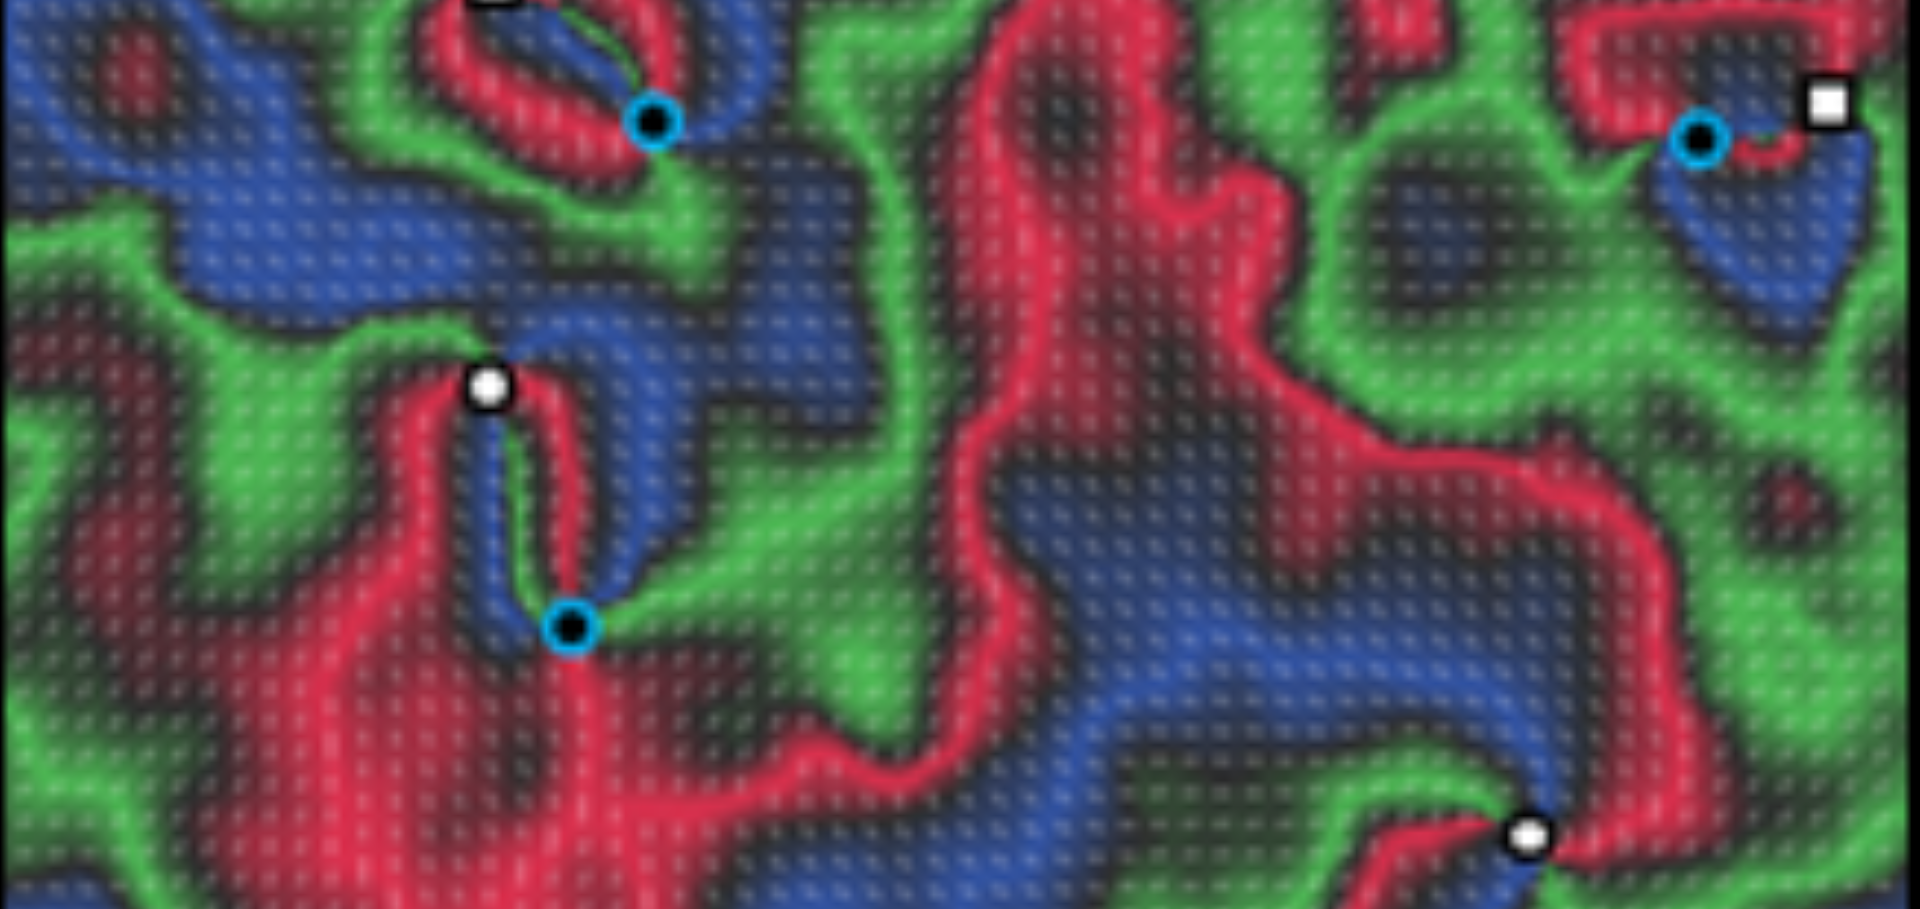 Image of domain walls and topological textures in Fe2O3